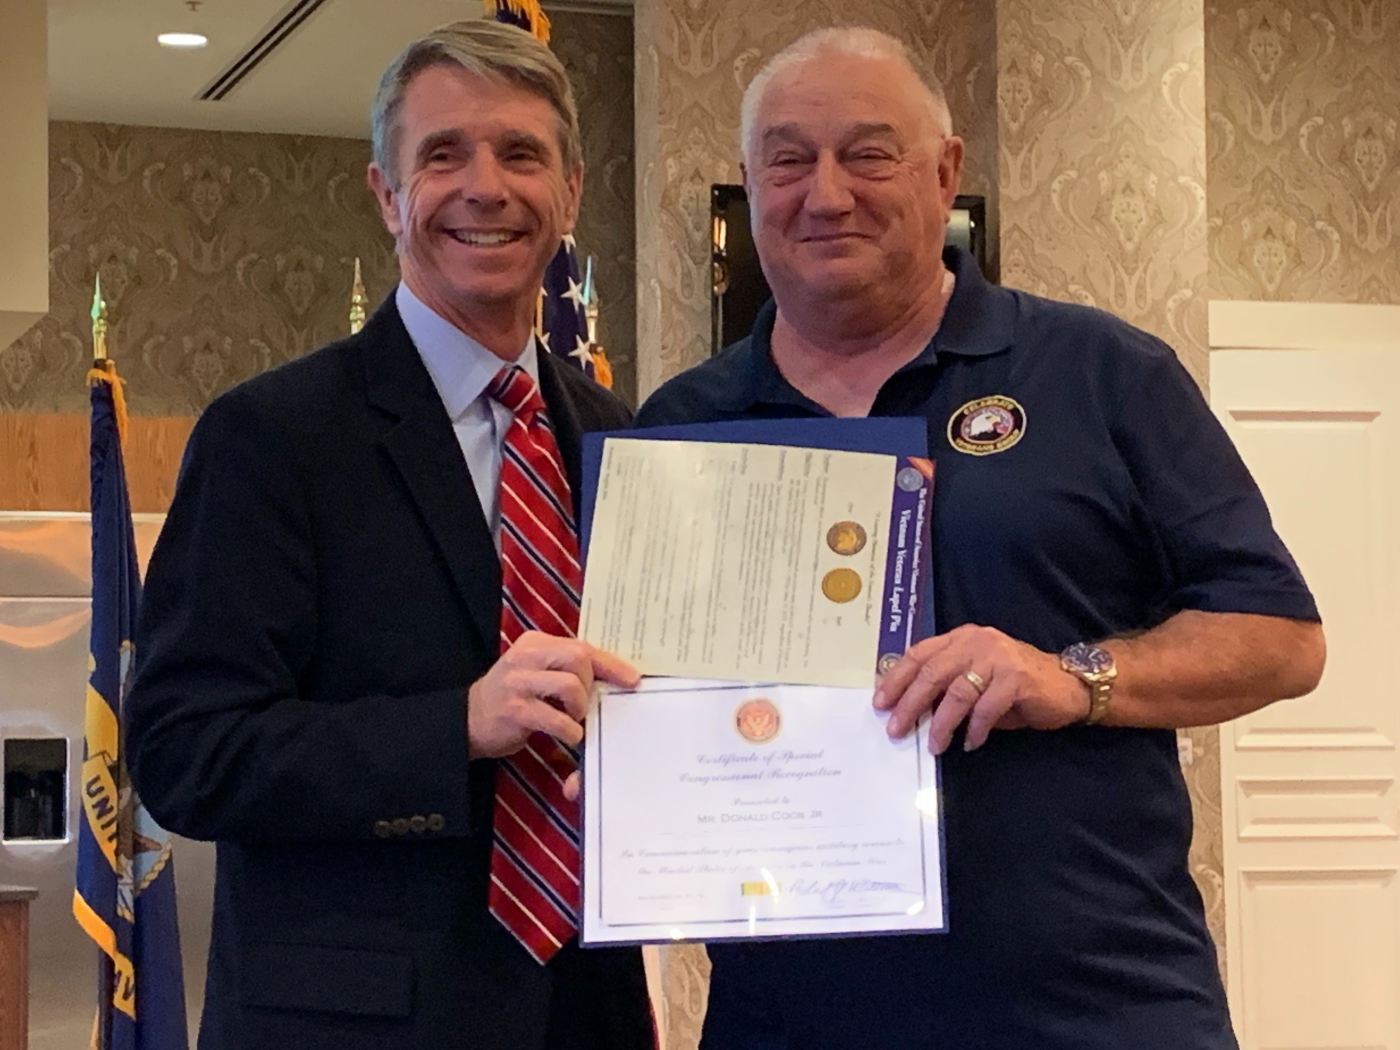 Vietnam Veteran Donald Cook, Jr., receives a certificate and pin from Rep. Rob Wittman during a ceremony Nov. 9, 2019.